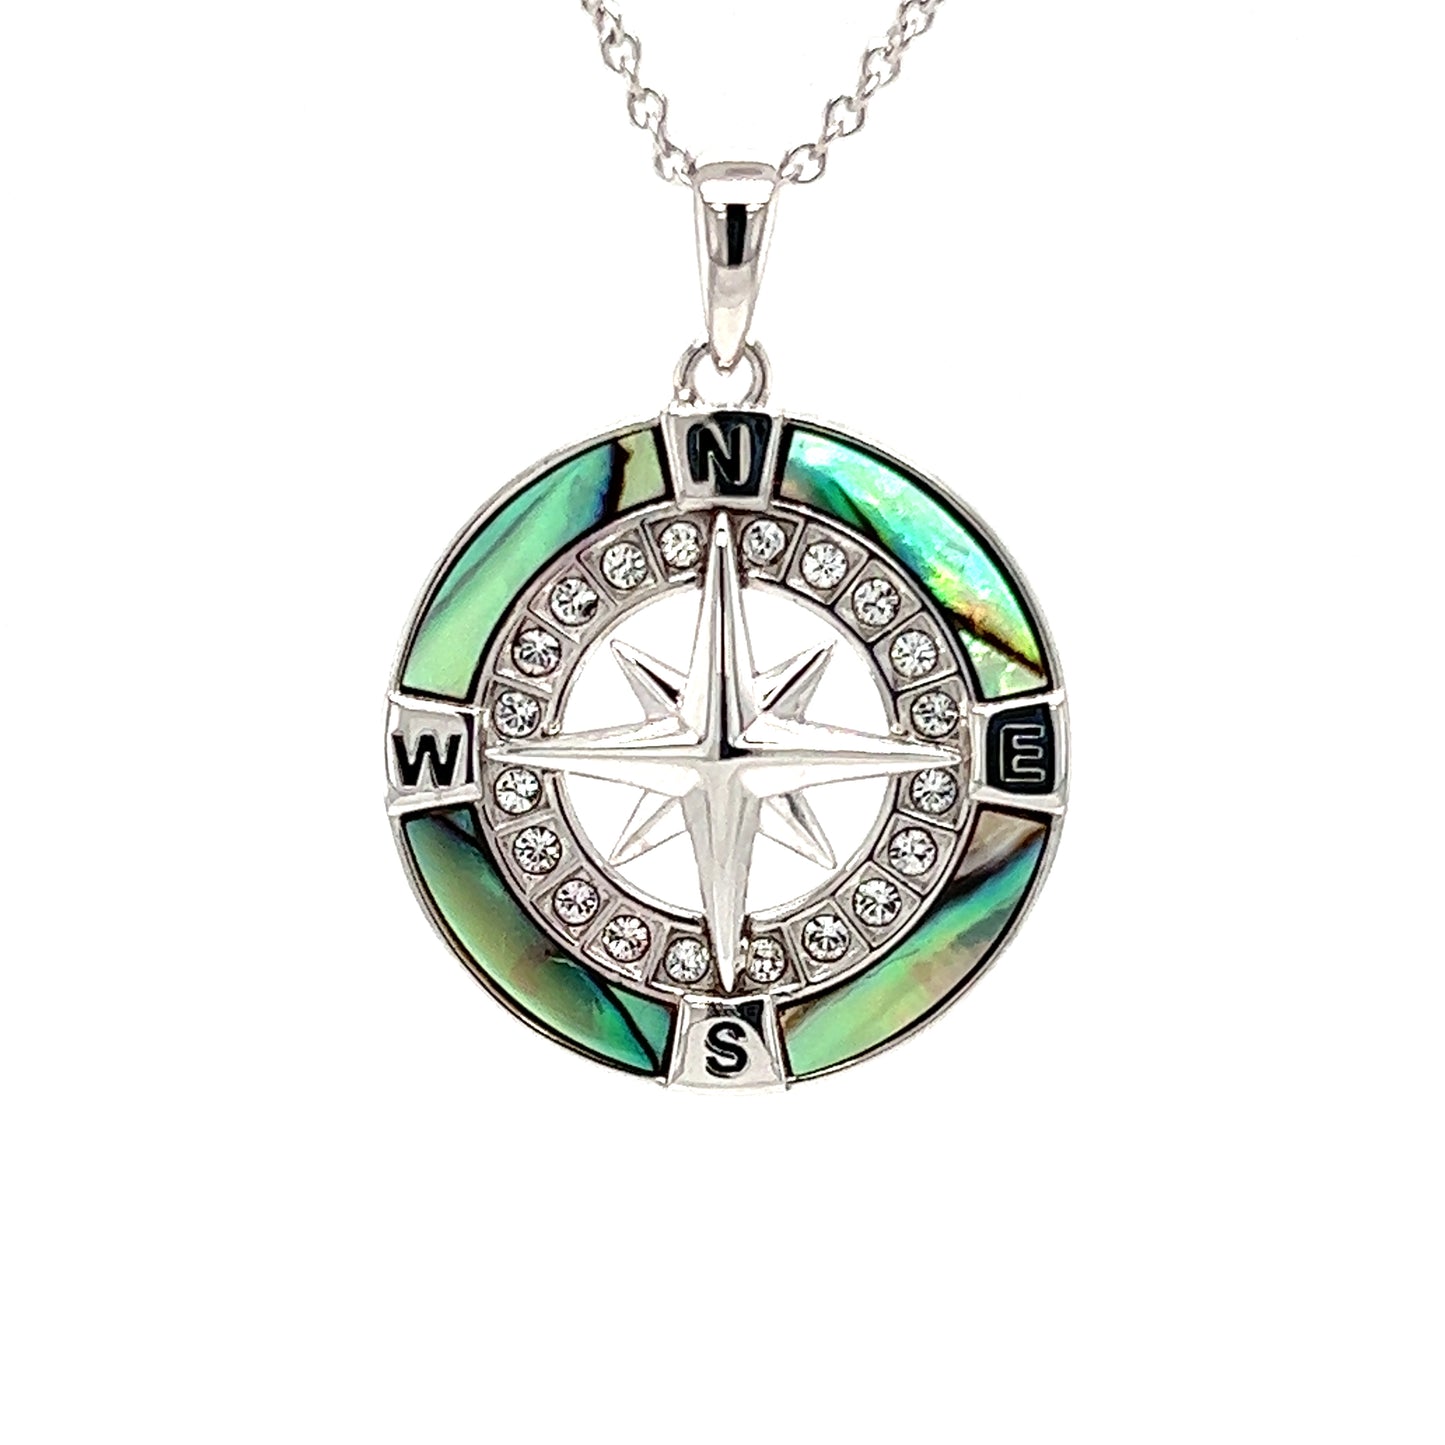 Abalone Shell Compass Necklace with White Crystals in Sterling Silver Front Pendant View